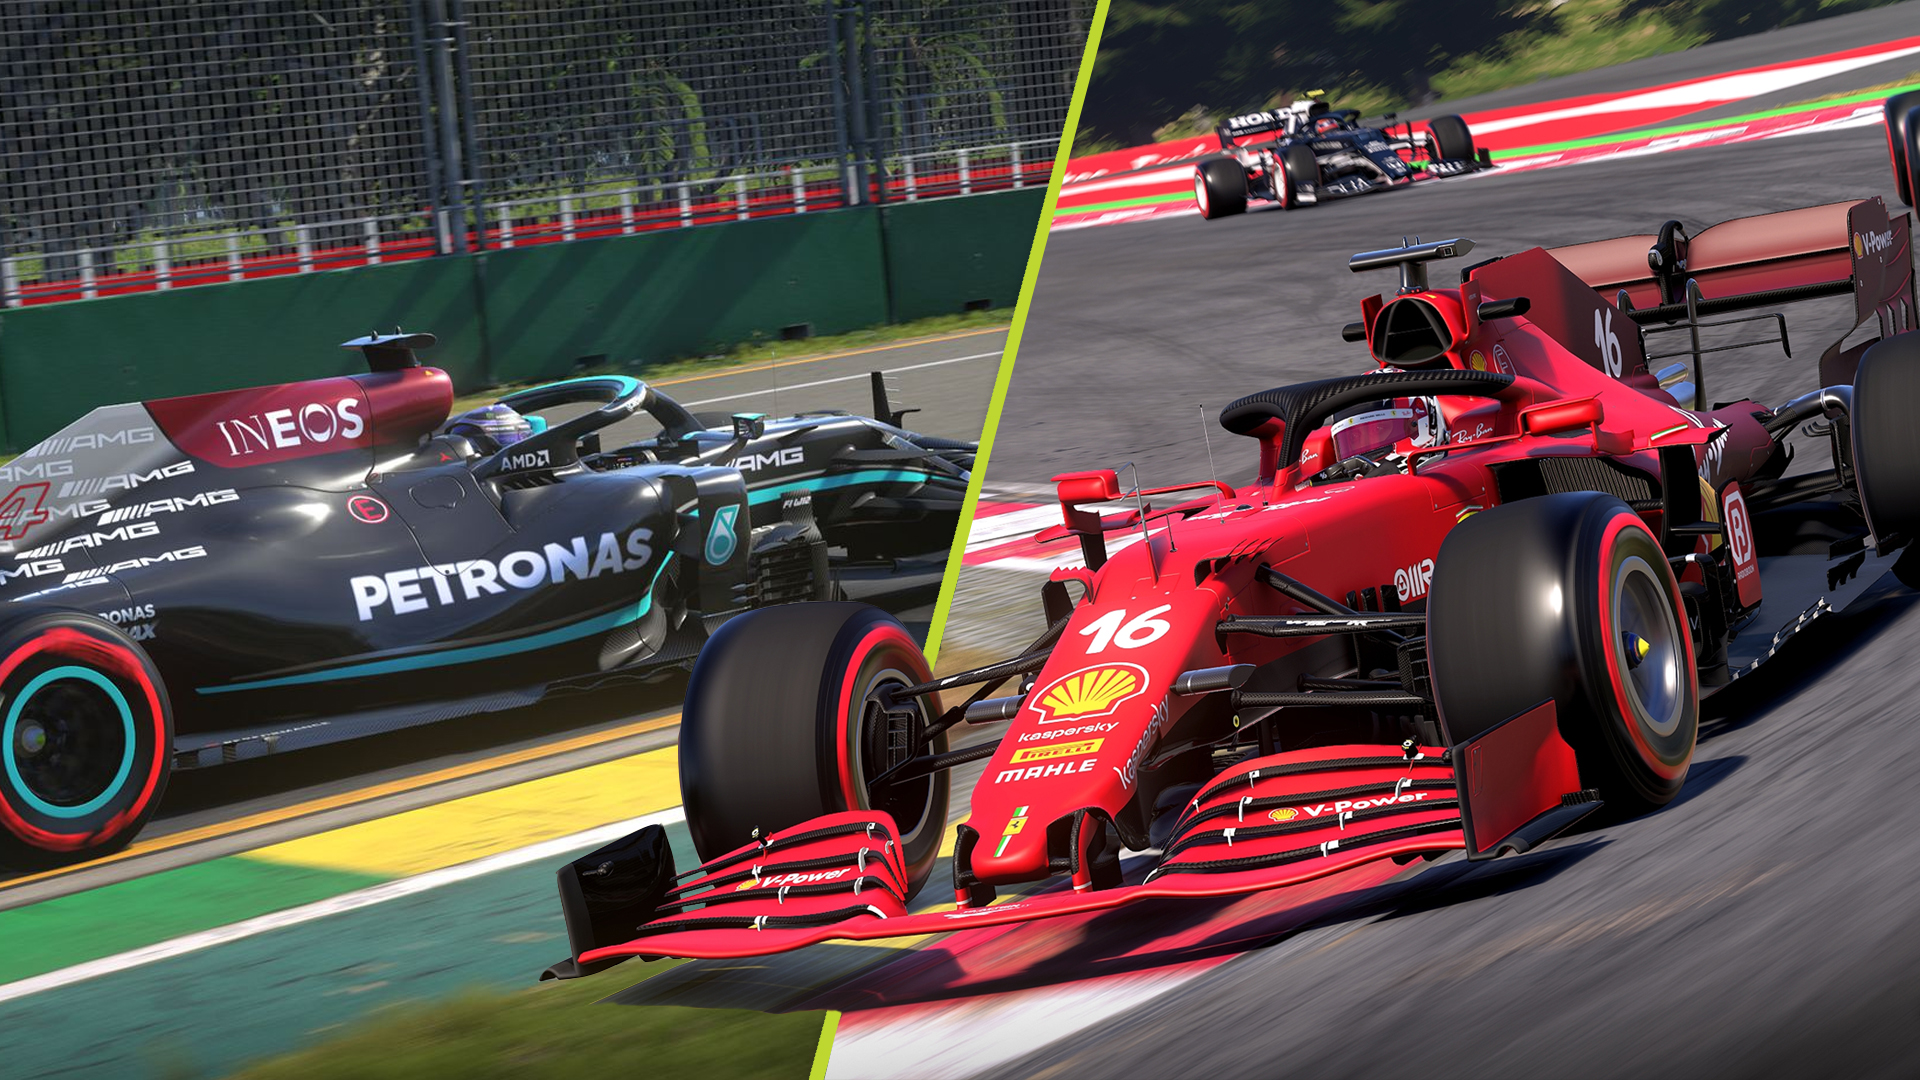 F1 22 reveal and release date news expected from EA Sports tomorrow